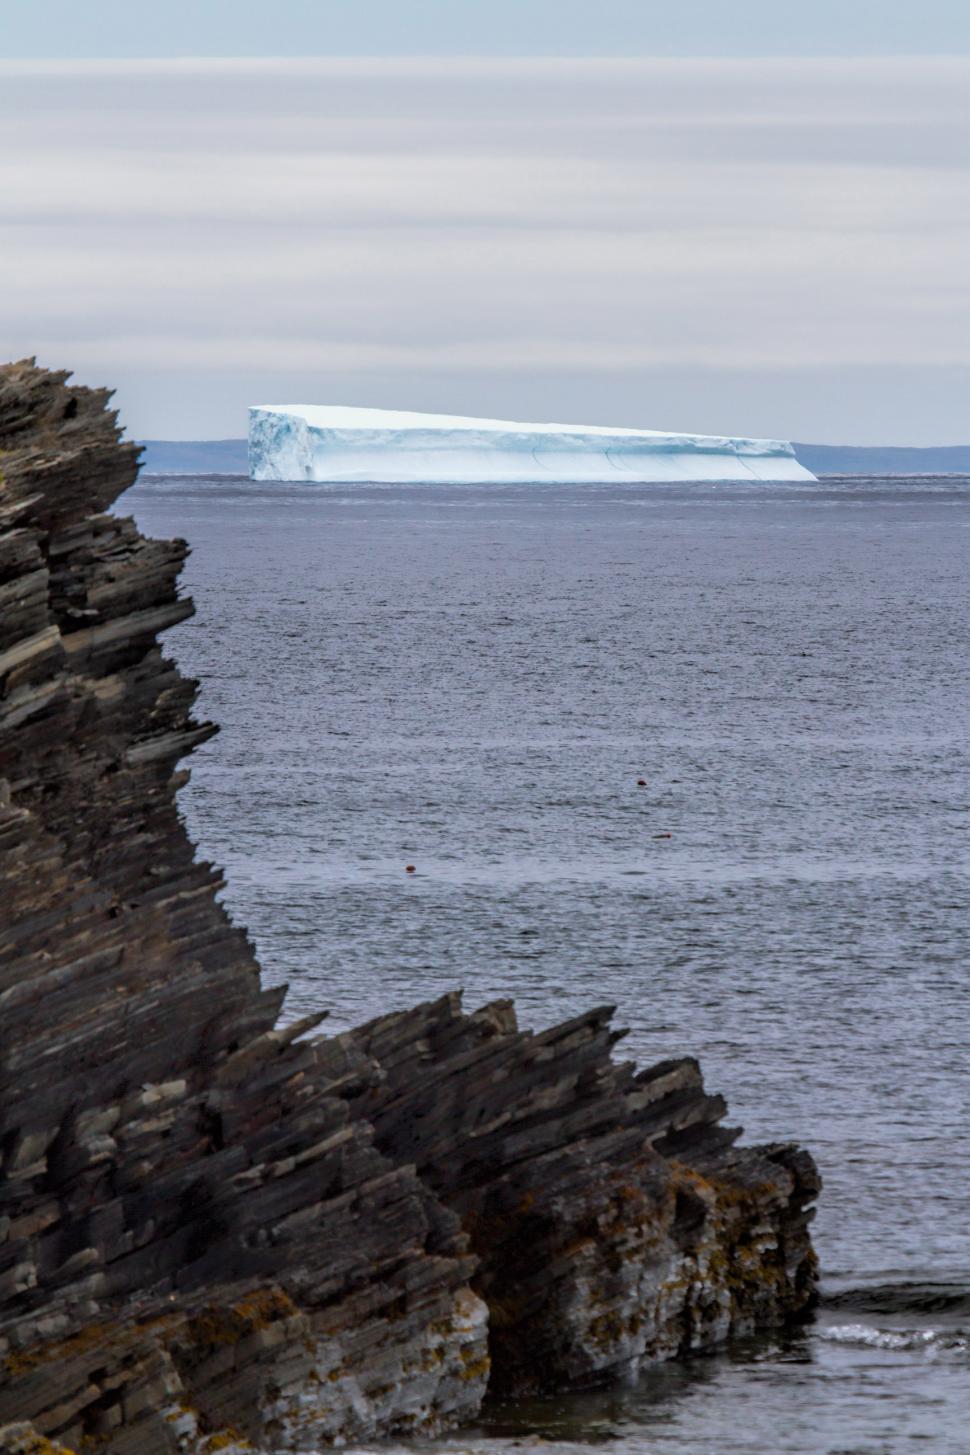 Free Image of Iceberg from Shore 